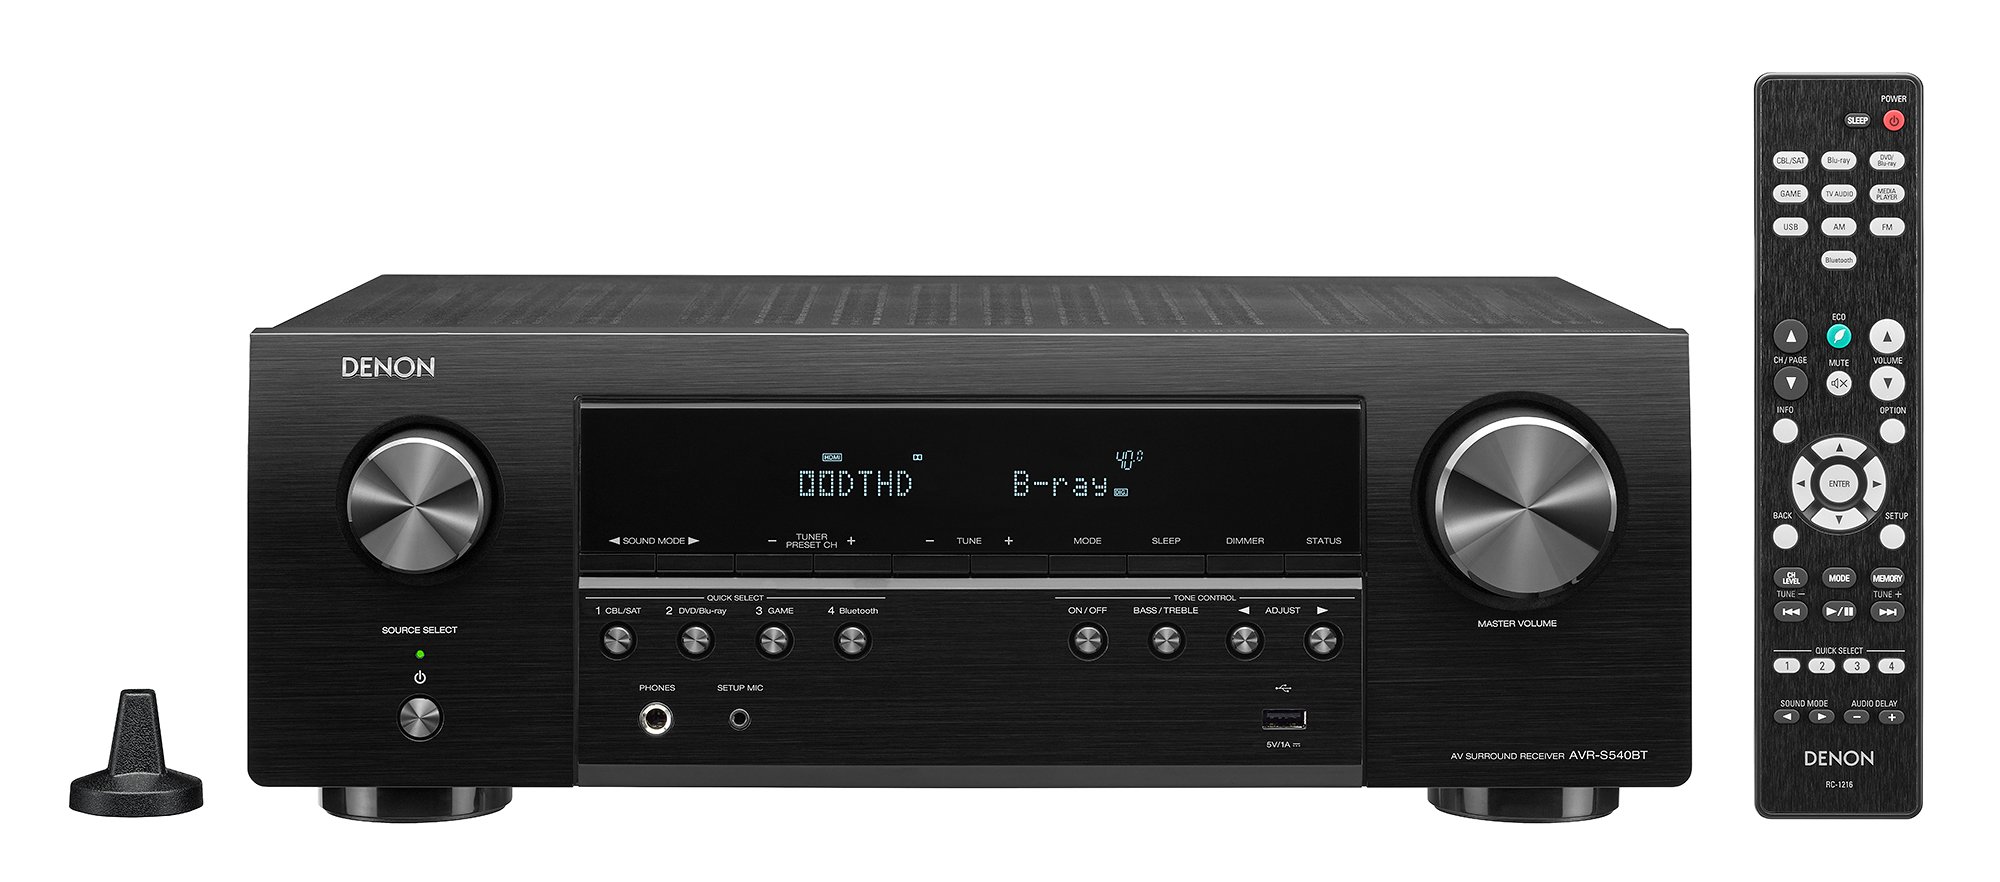 Denon AVR-S540BT 5.2 channel Receiver - 4K Ultra HD Audio Video, Bluetooth, USB port, Compatible with HEOS Link for Wireless Music Streaming (Discontinued by Manufacturer)